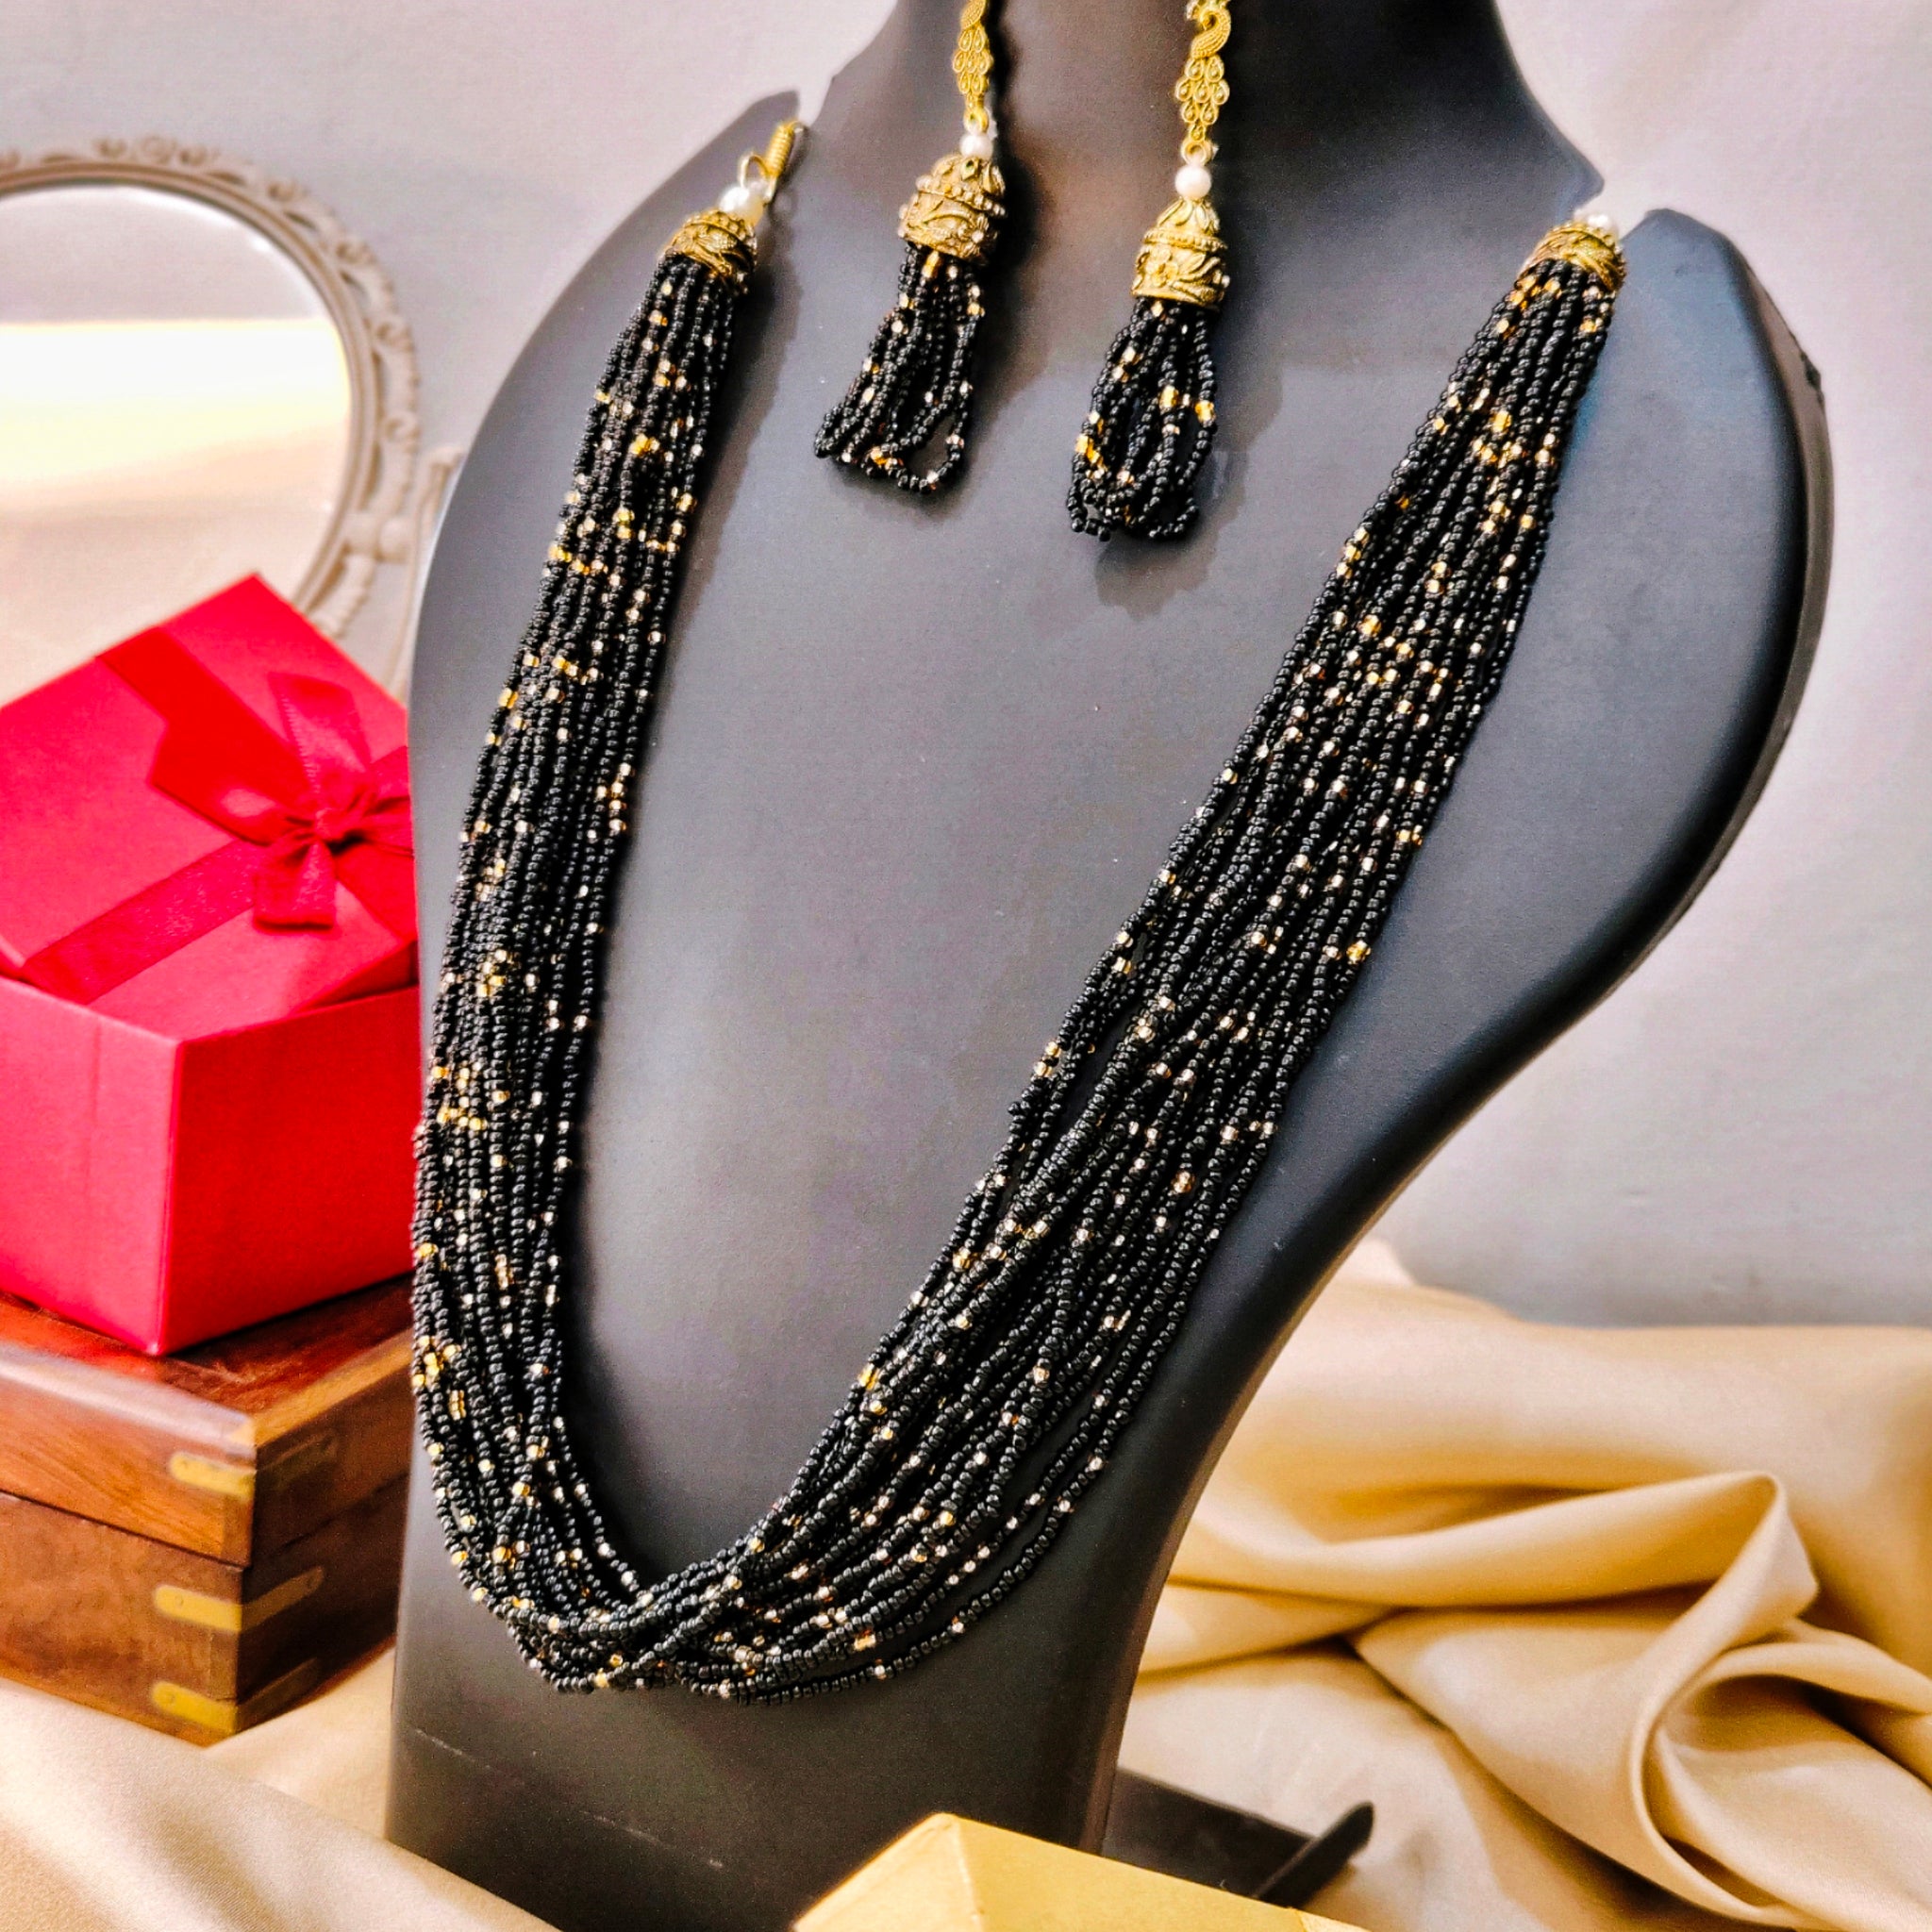 Moti Jhalar Necklace Set | Maroon-colour Beads Necklace & Earrings for Parties & Office Going Women from House of Mrigaya by Nandini-Black - Mrigaya India